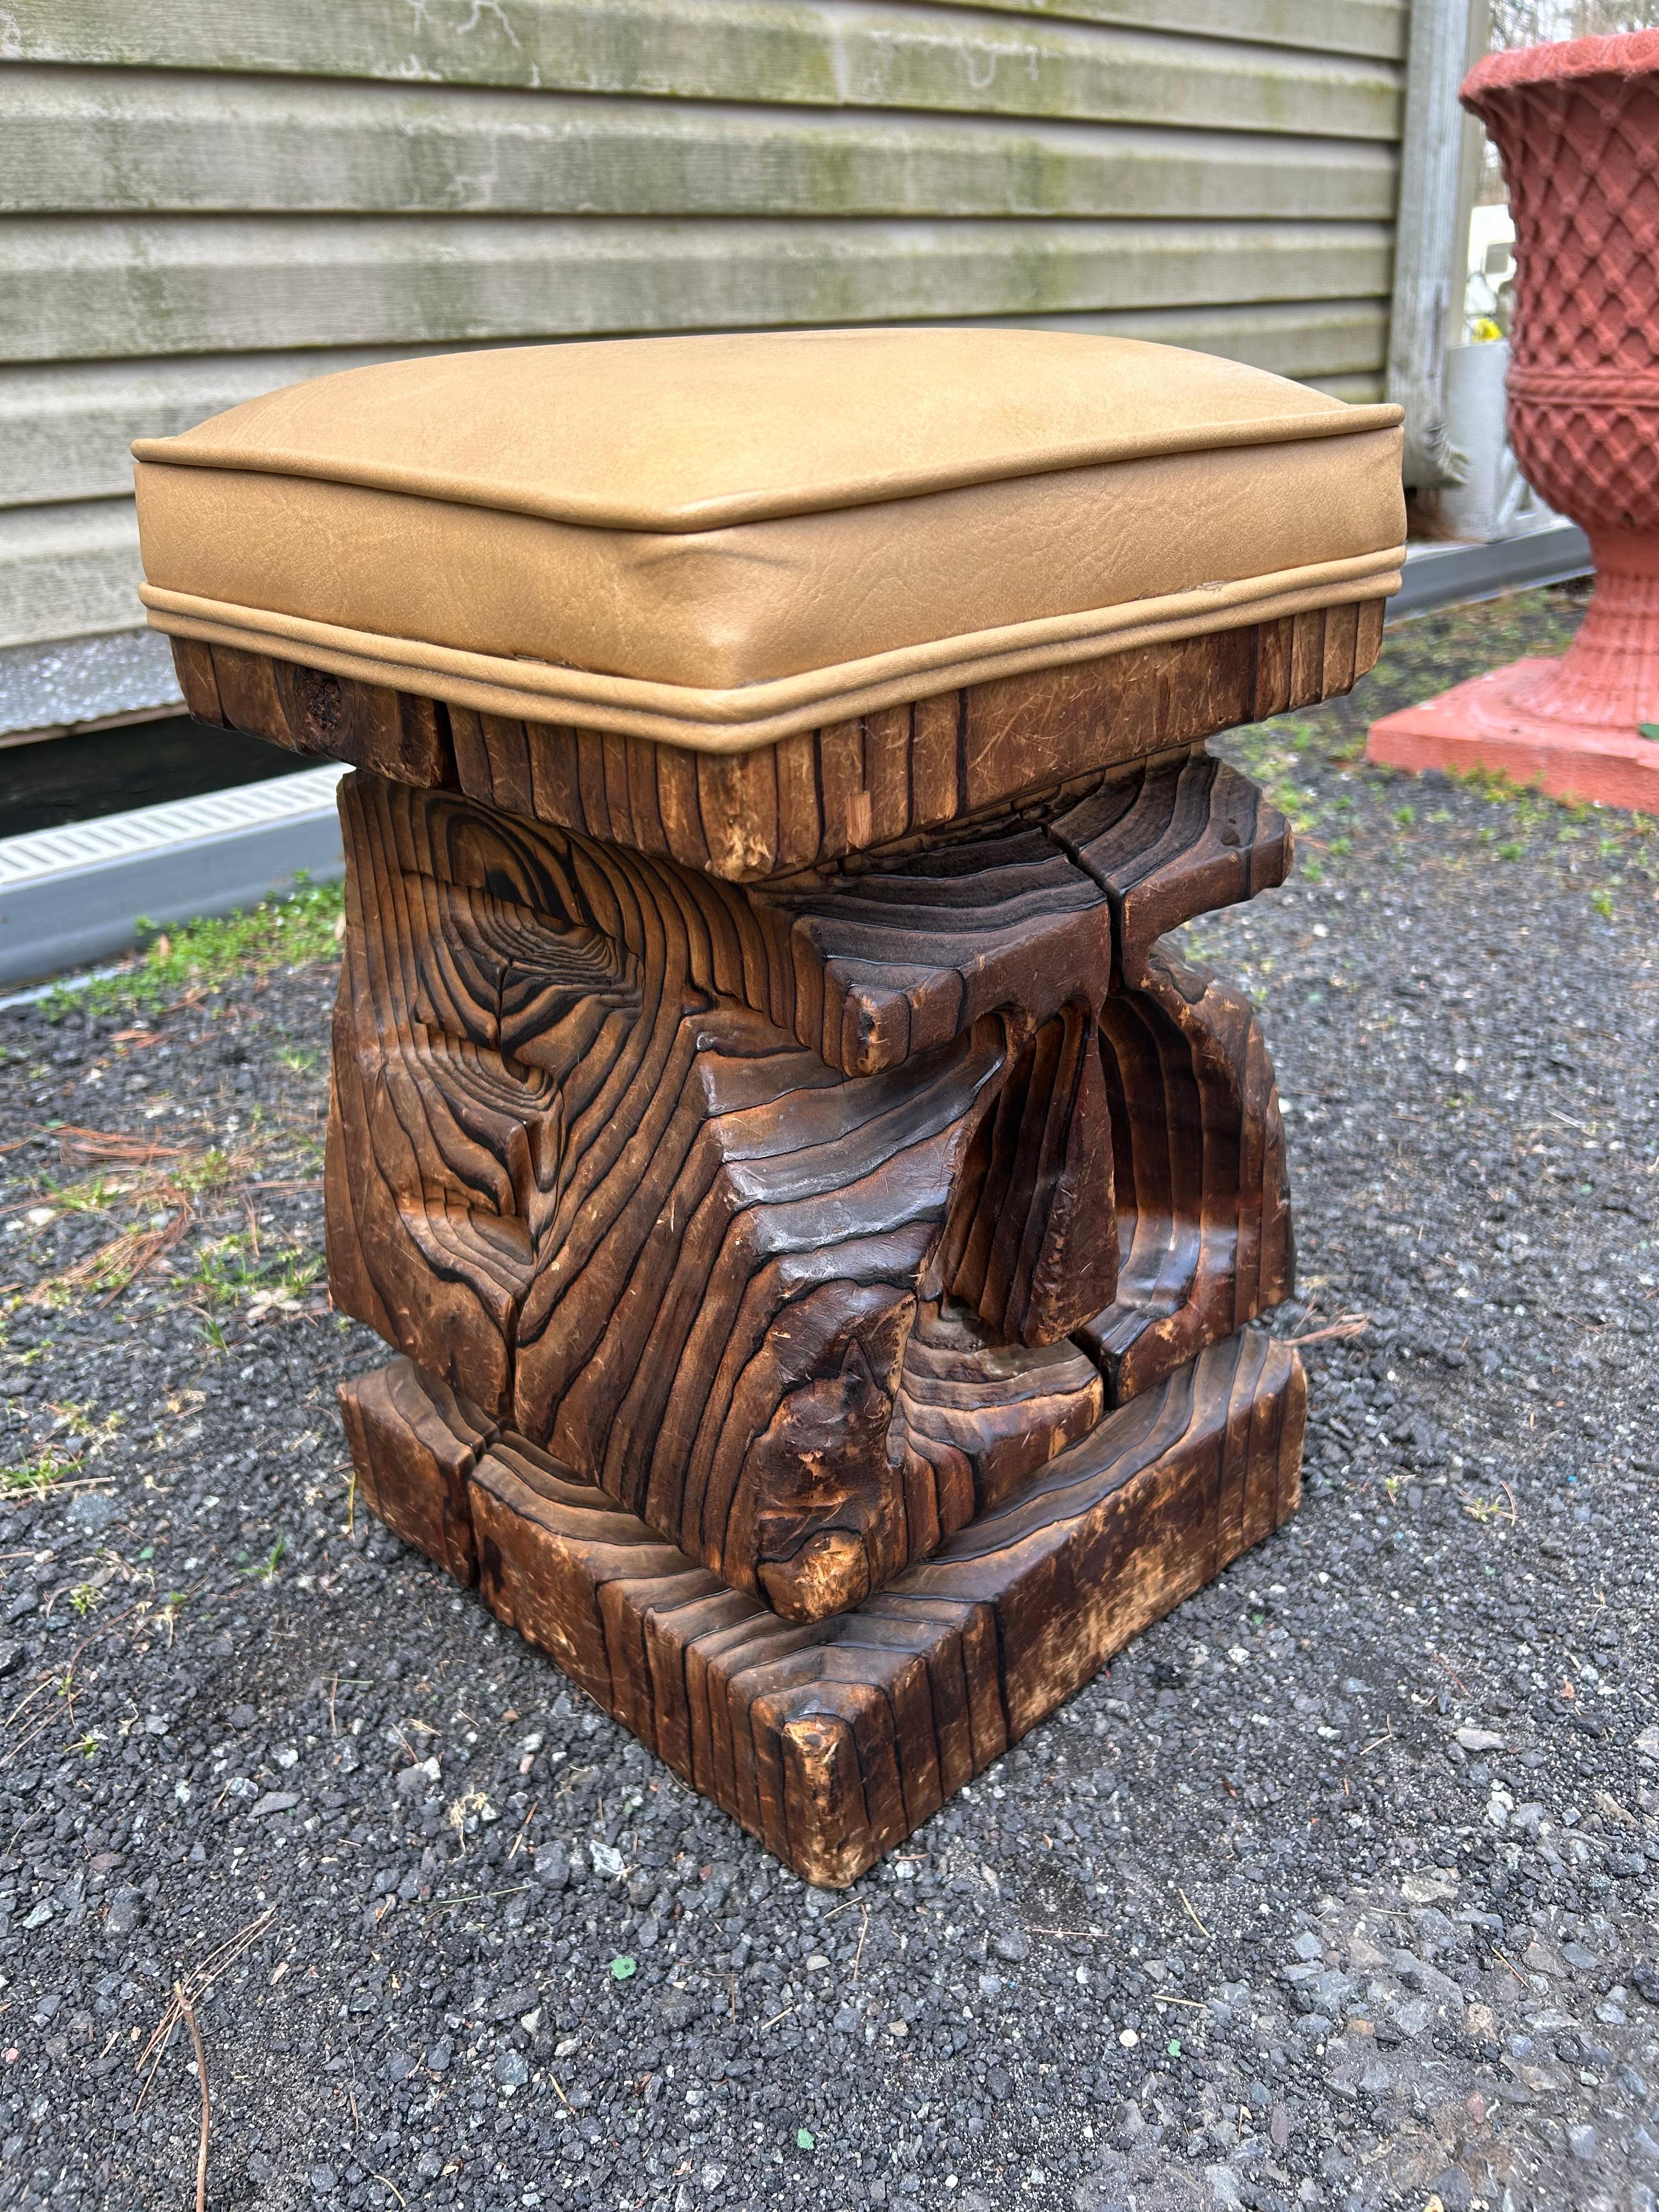 Wonderful Witco Tiki Hand Carved Stool , c. 1960s In Good Condition For Sale In Pemberton, NJ